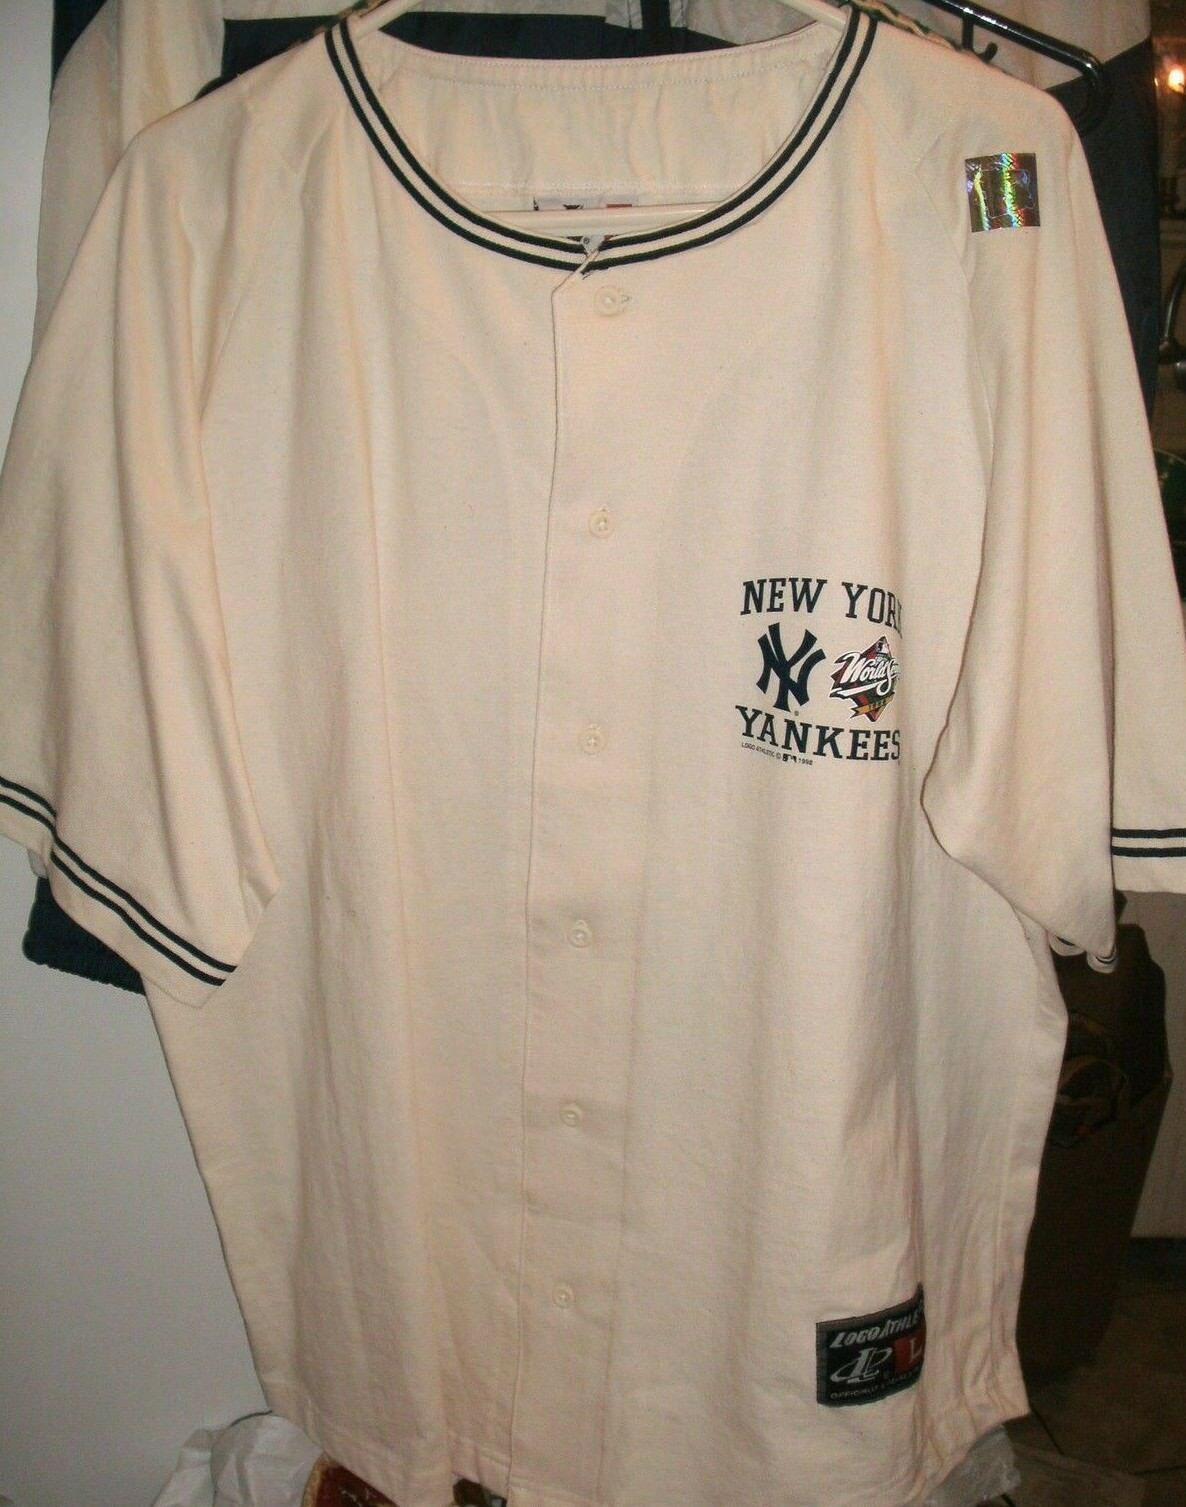 Primary image for Yankees Derek Jeter Road Shirt 1998 World Series Logo Authentic 100% Cotton LGG